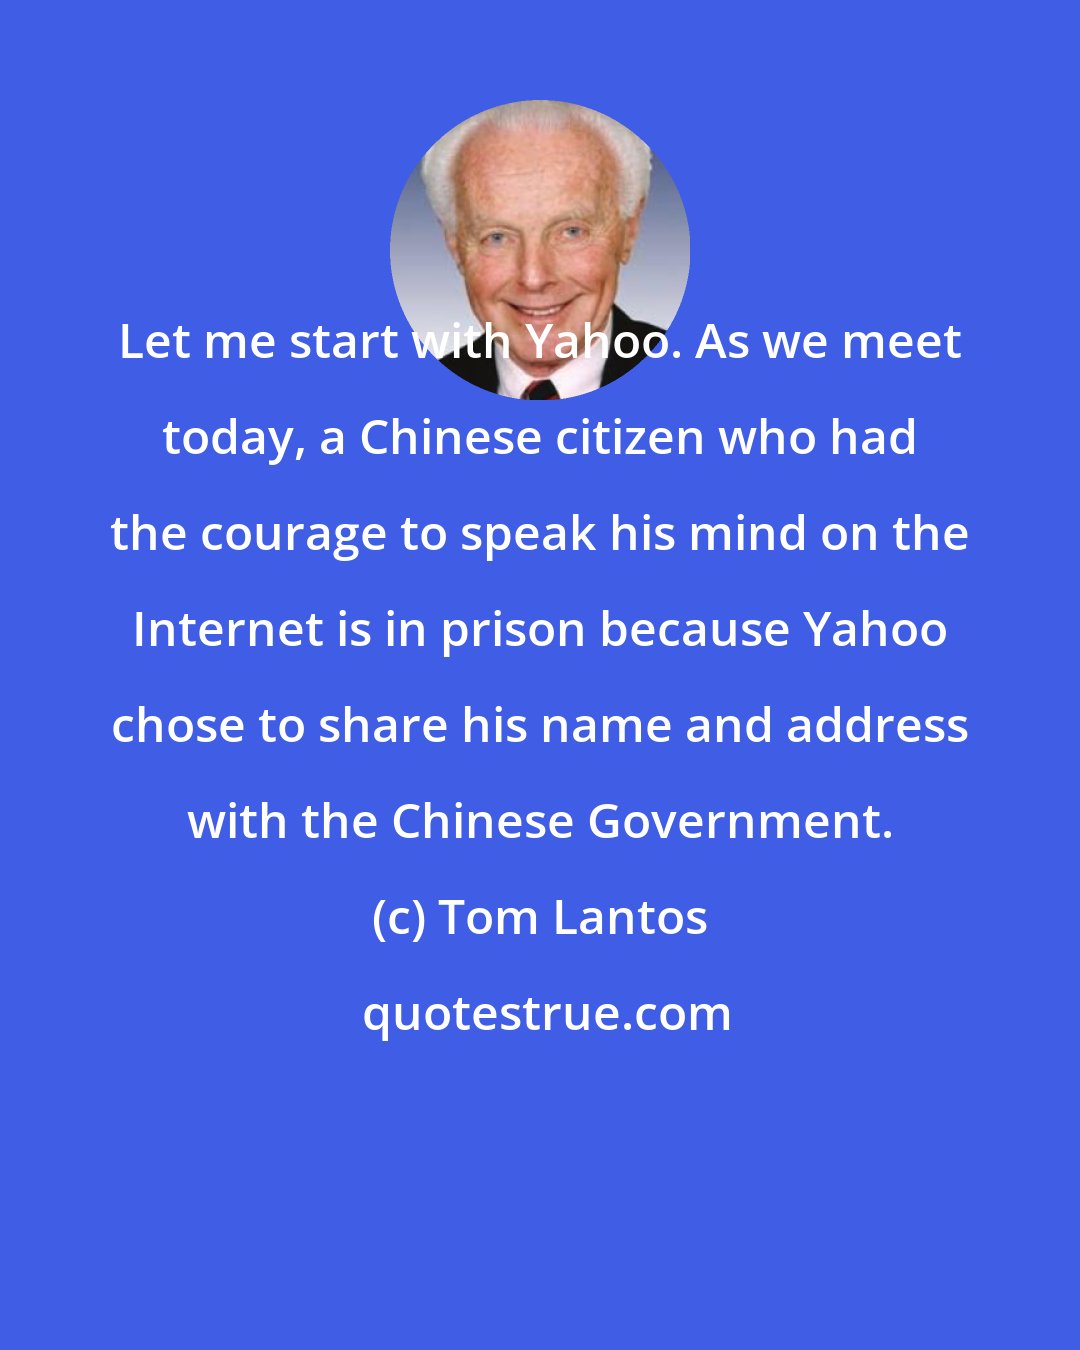 Tom Lantos: Let me start with Yahoo. As we meet today, a Chinese citizen who had the courage to speak his mind on the Internet is in prison because Yahoo chose to share his name and address with the Chinese Government.